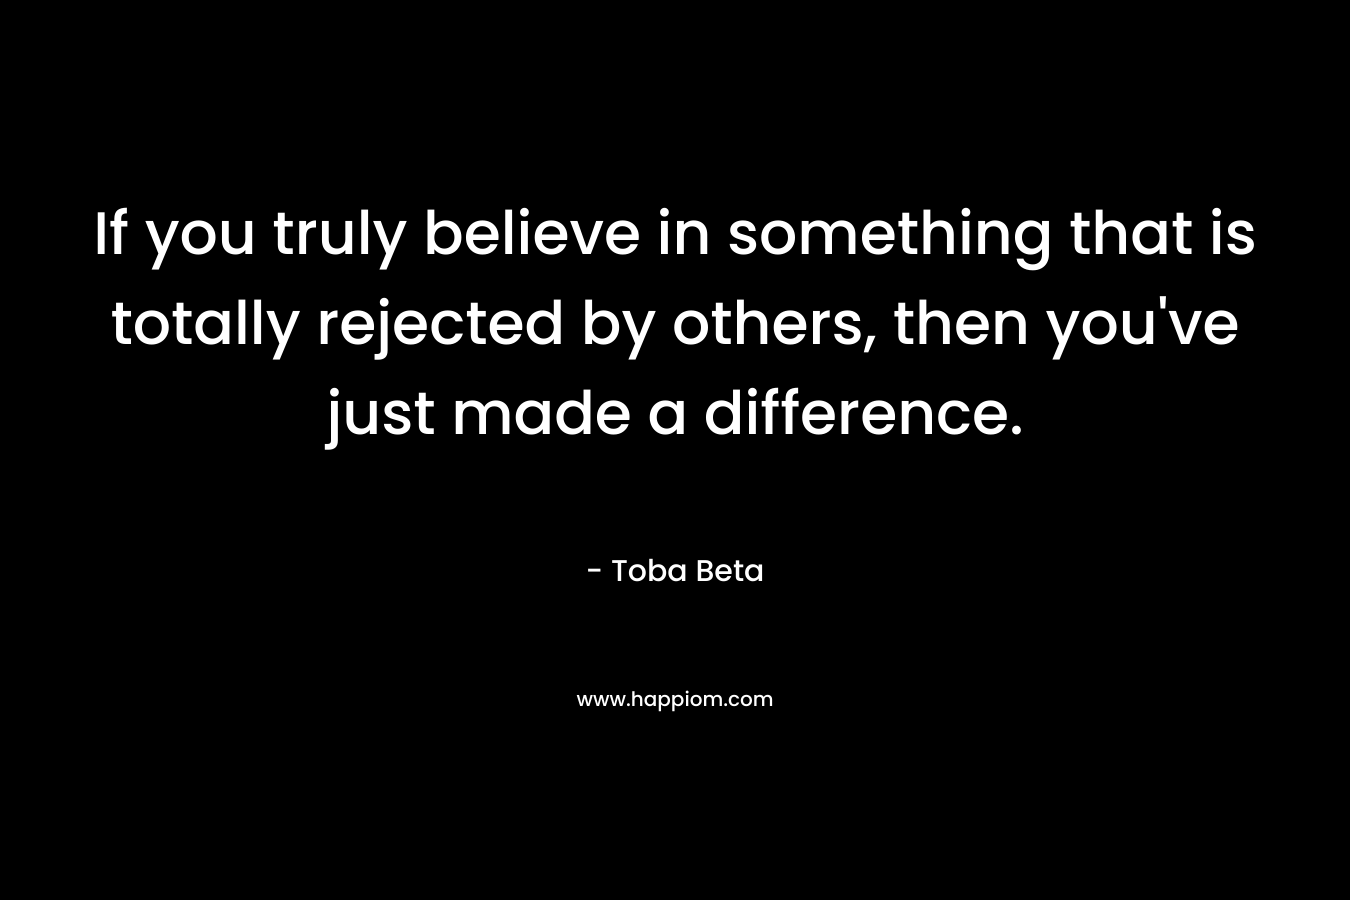 If you truly believe in something that is totally rejected by others, then you've just made a difference.